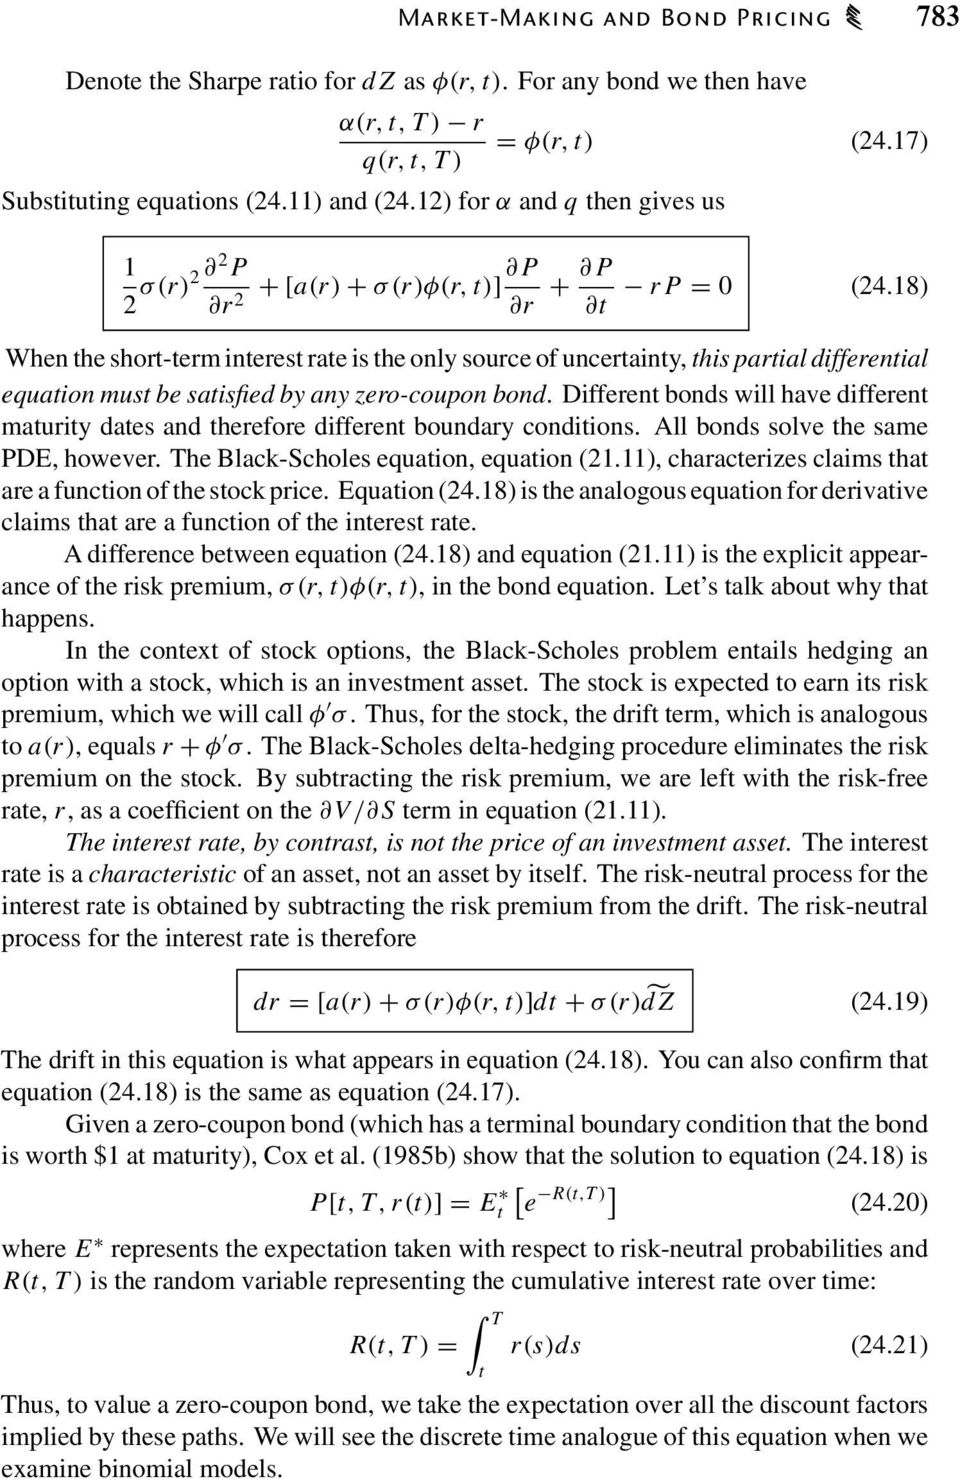 8) When the short-term interest rate is the only source of uncertainty, this partial differential equation must be satisfied by any zero-coupon bond.